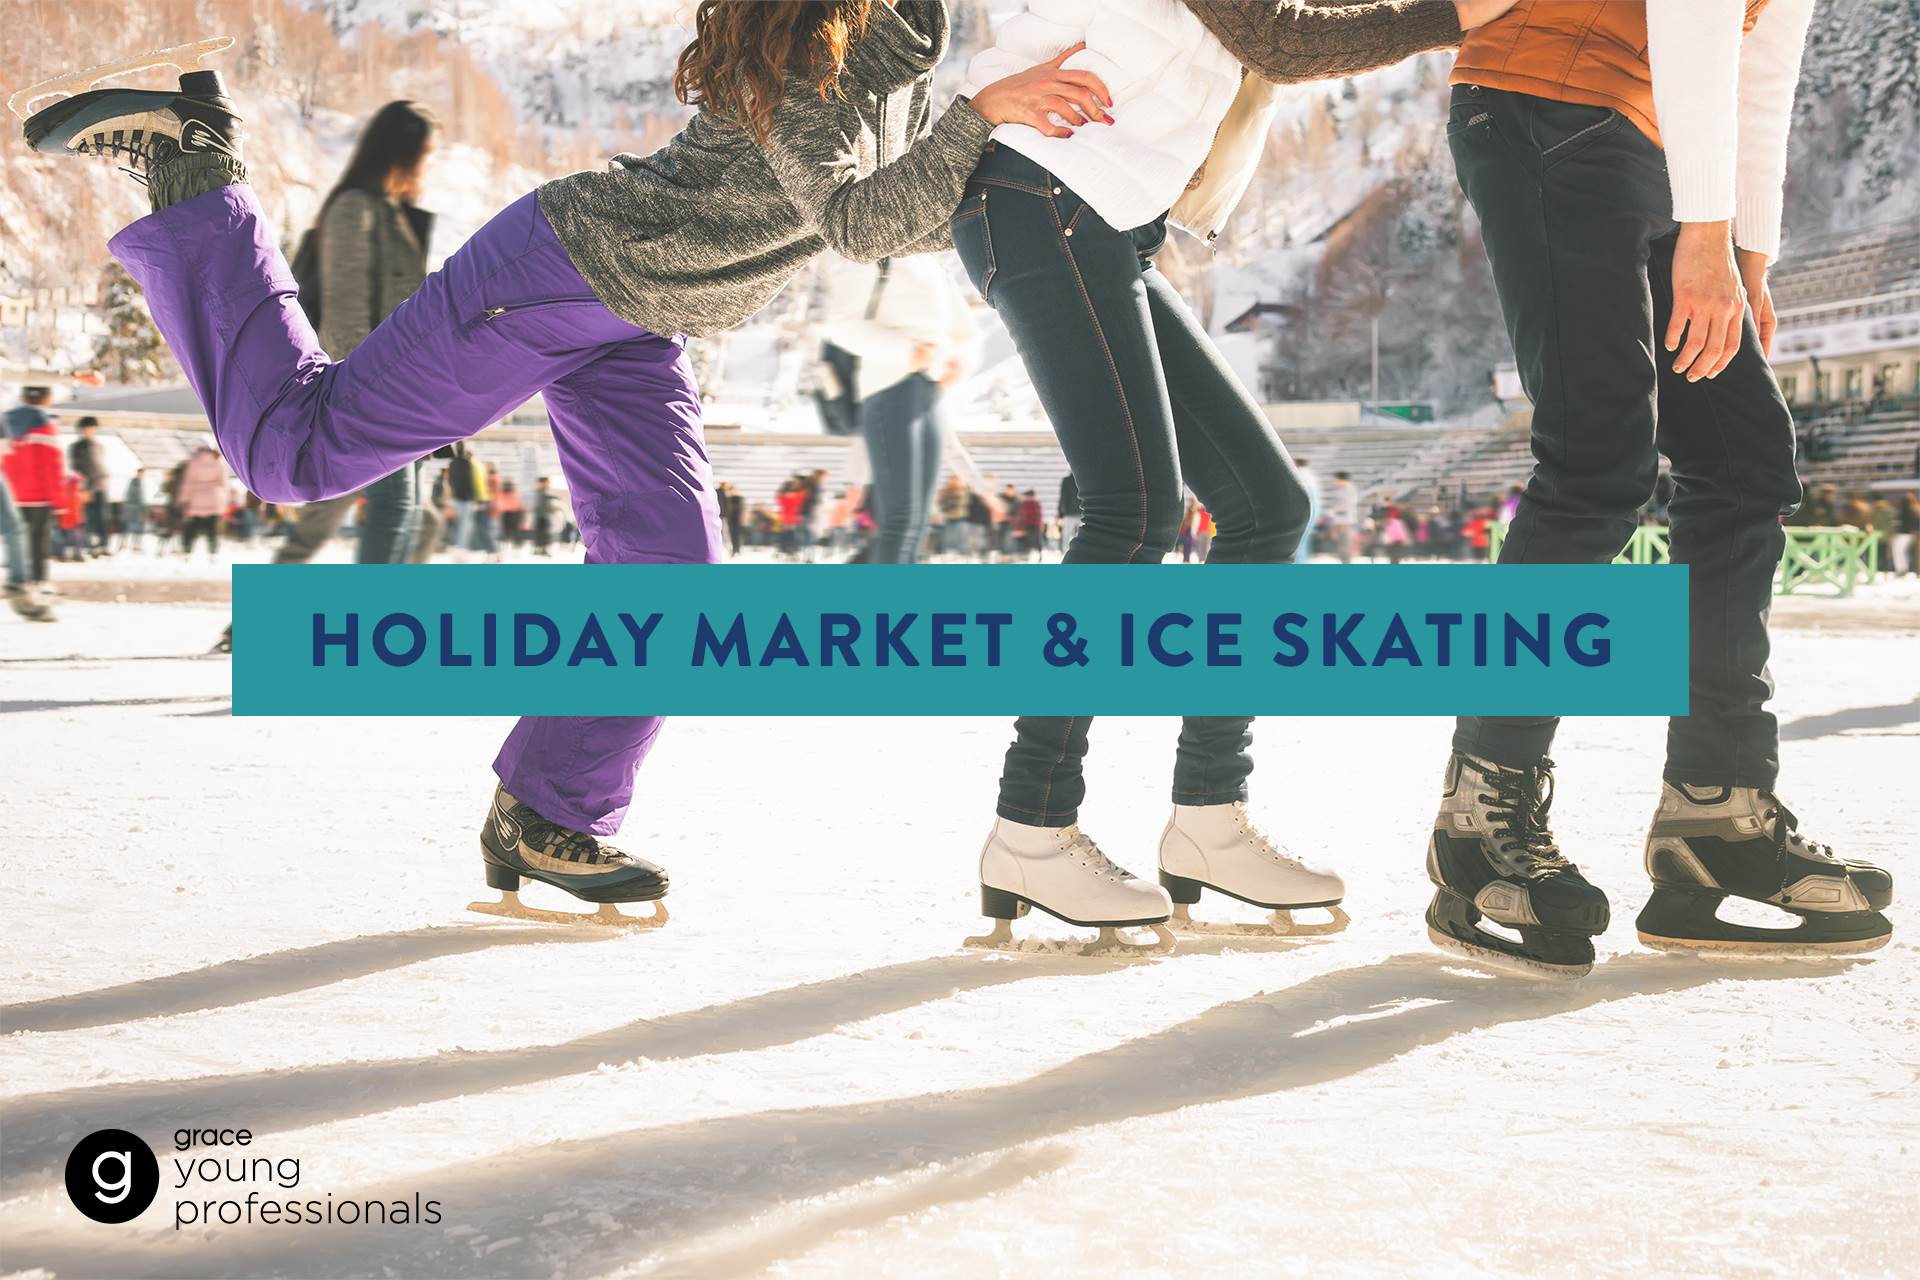 Link to Holiday Market & Ice Skating detail page